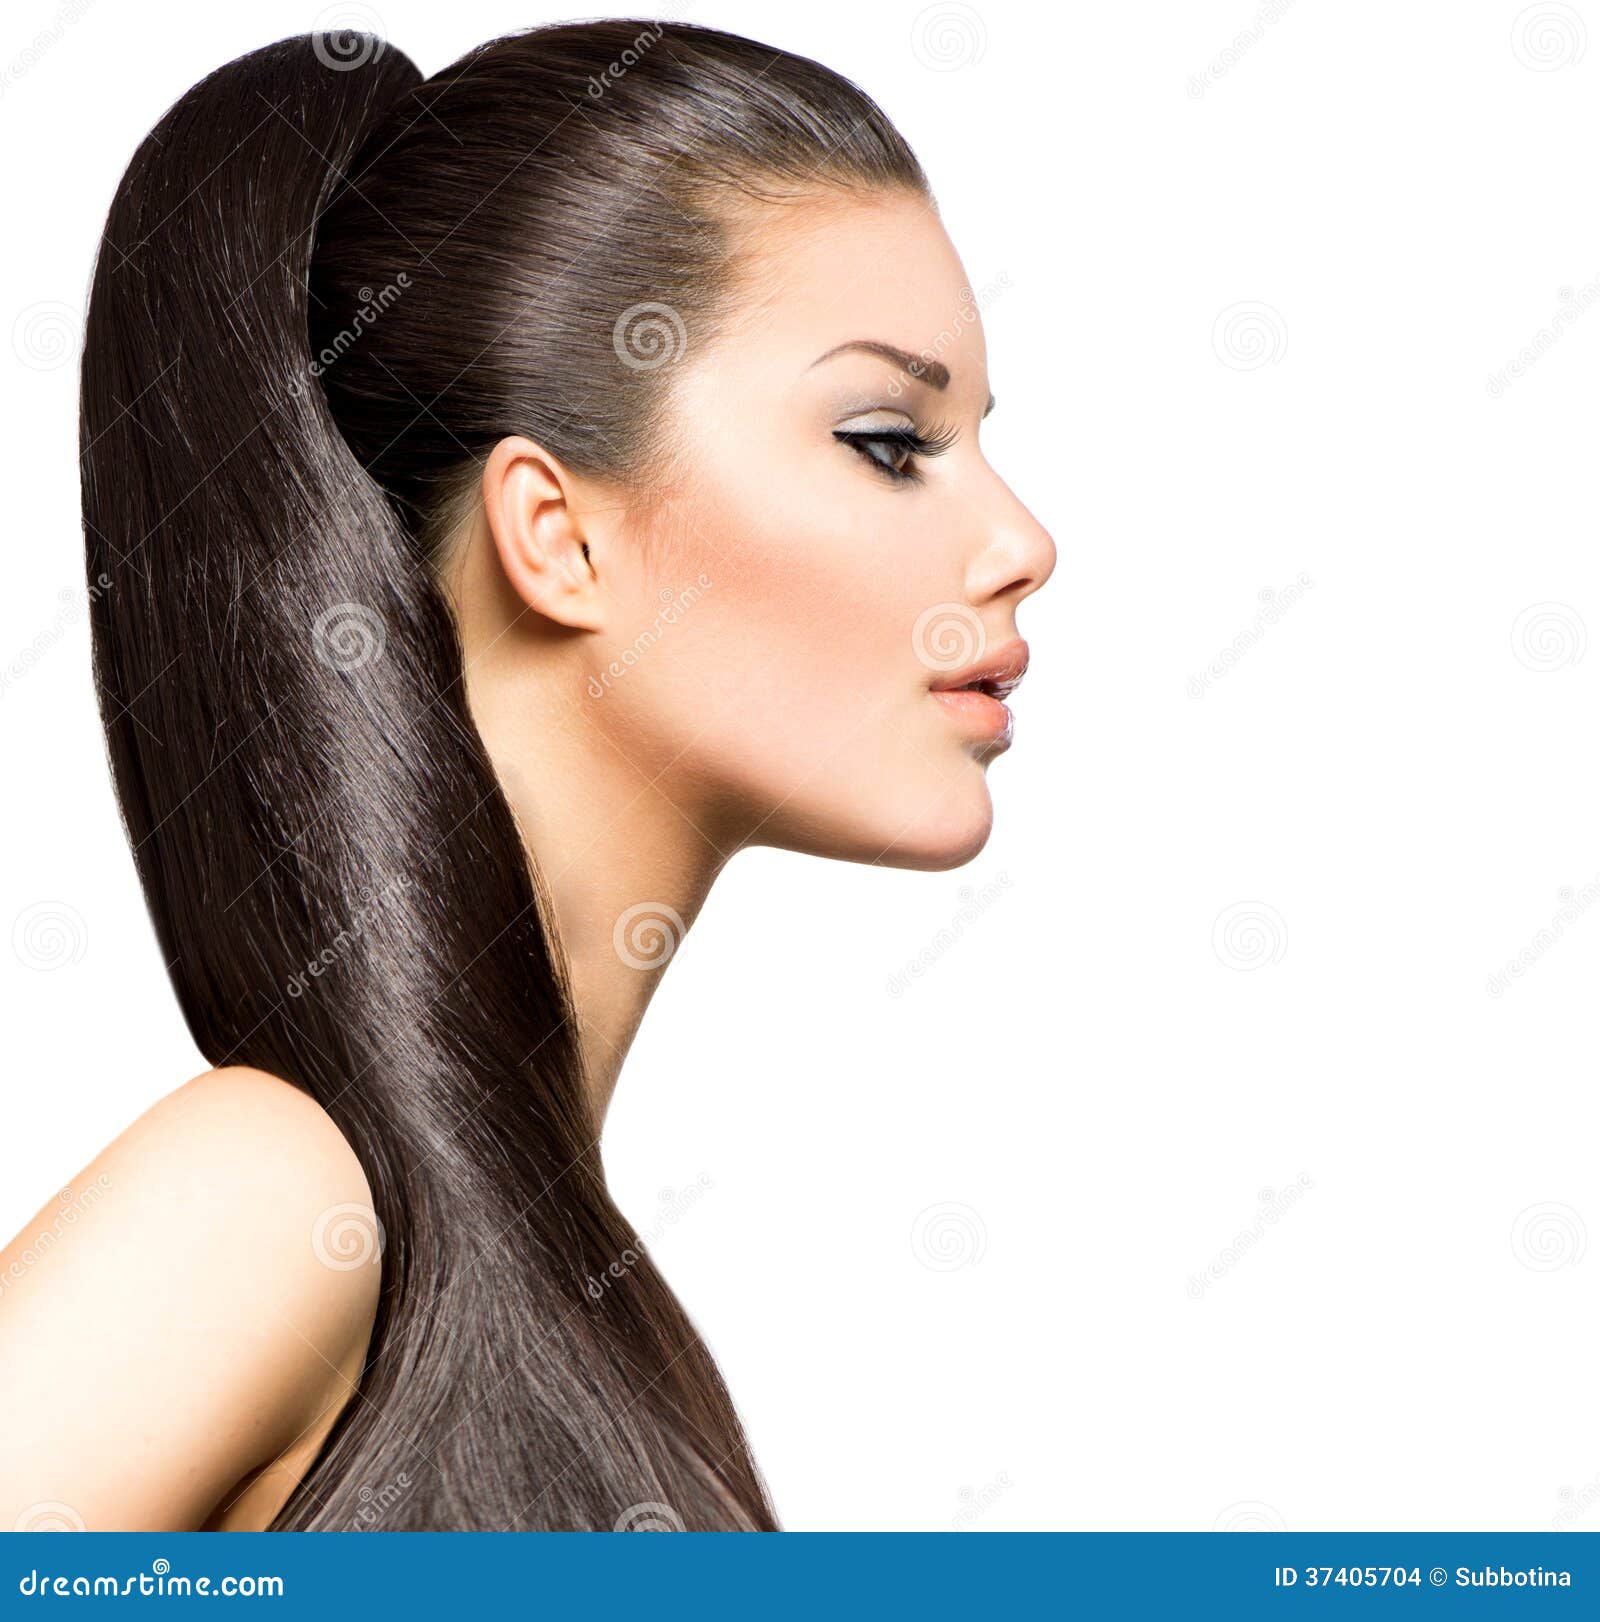 Ponytail Hairstyle. Beauty Brunette Fashion Model Girl.